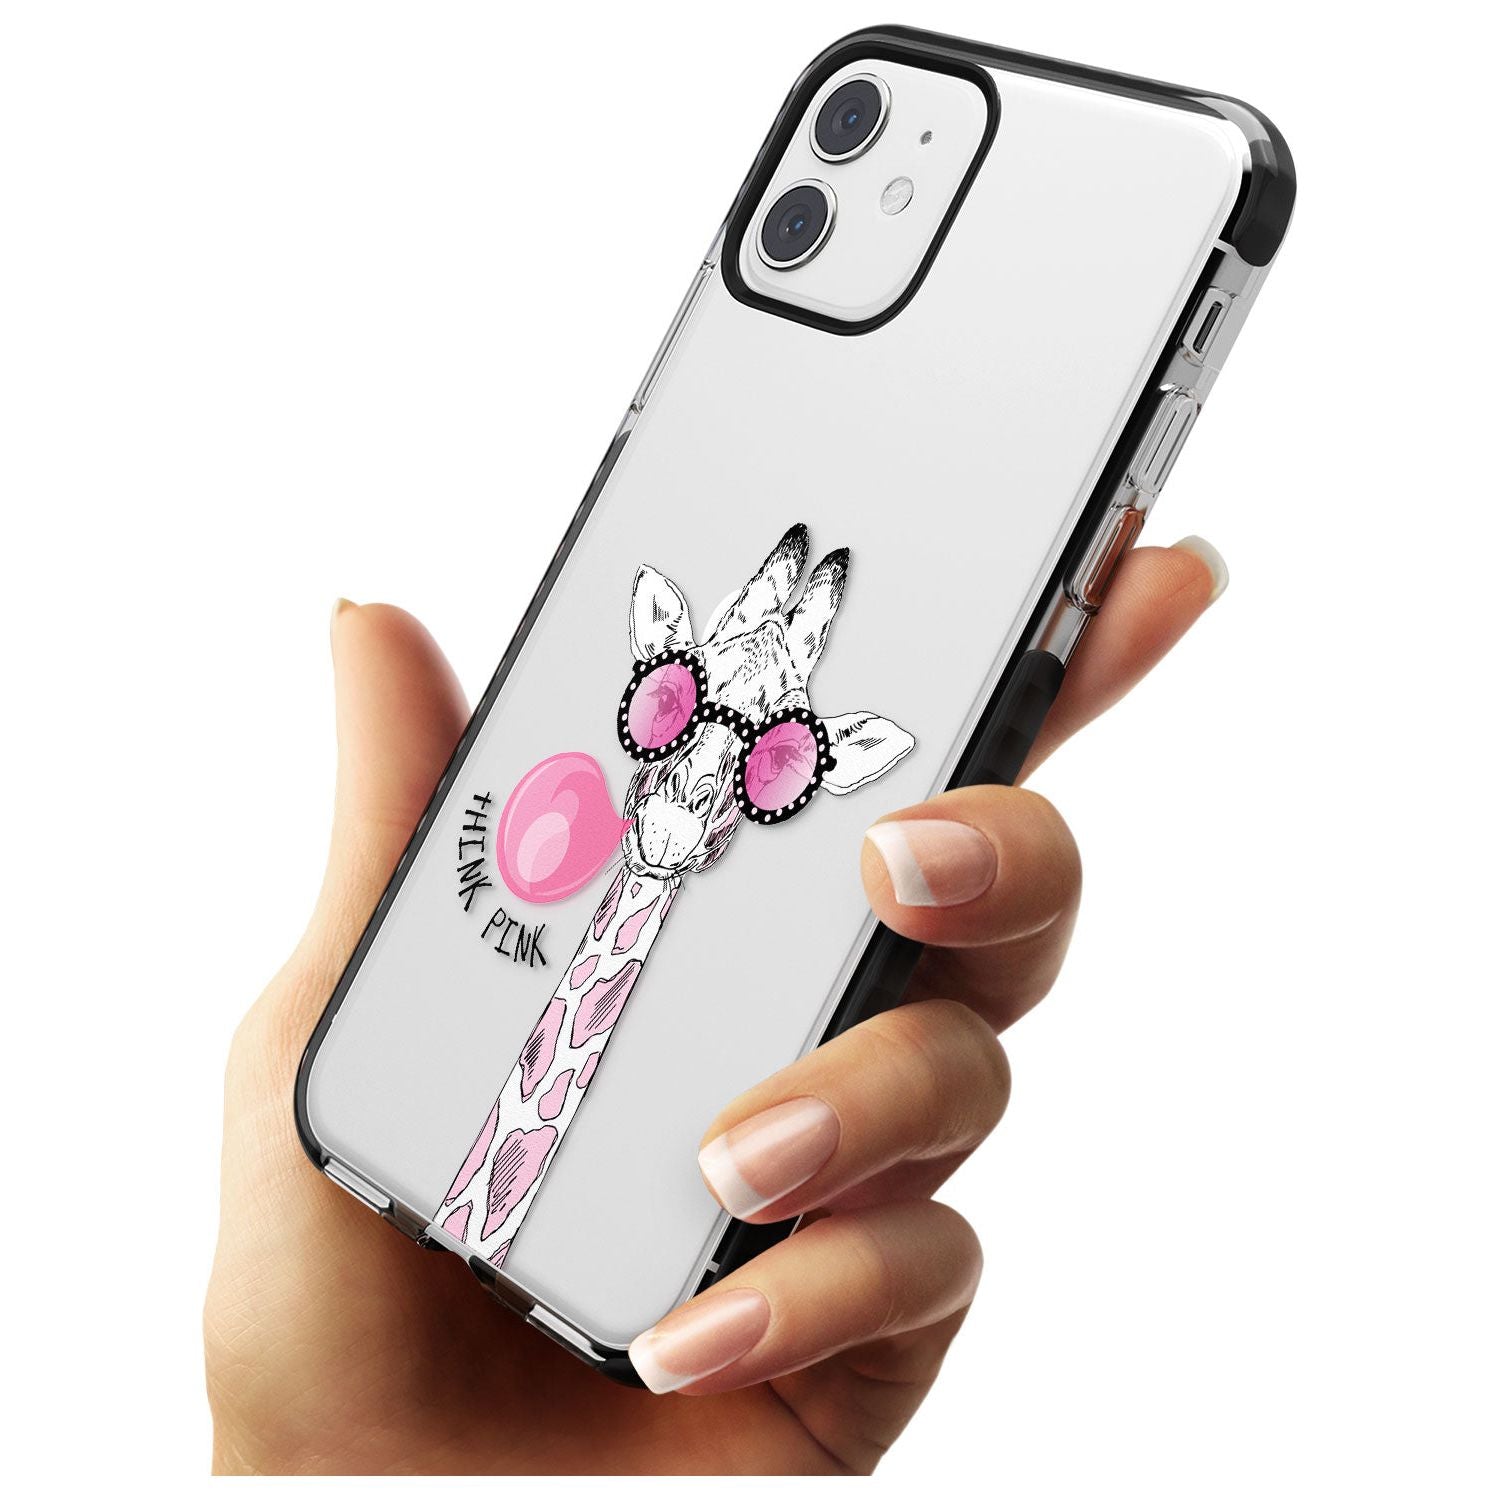 Think Pink Giraffe Black Impact Phone Case for iPhone 11 Pro Max